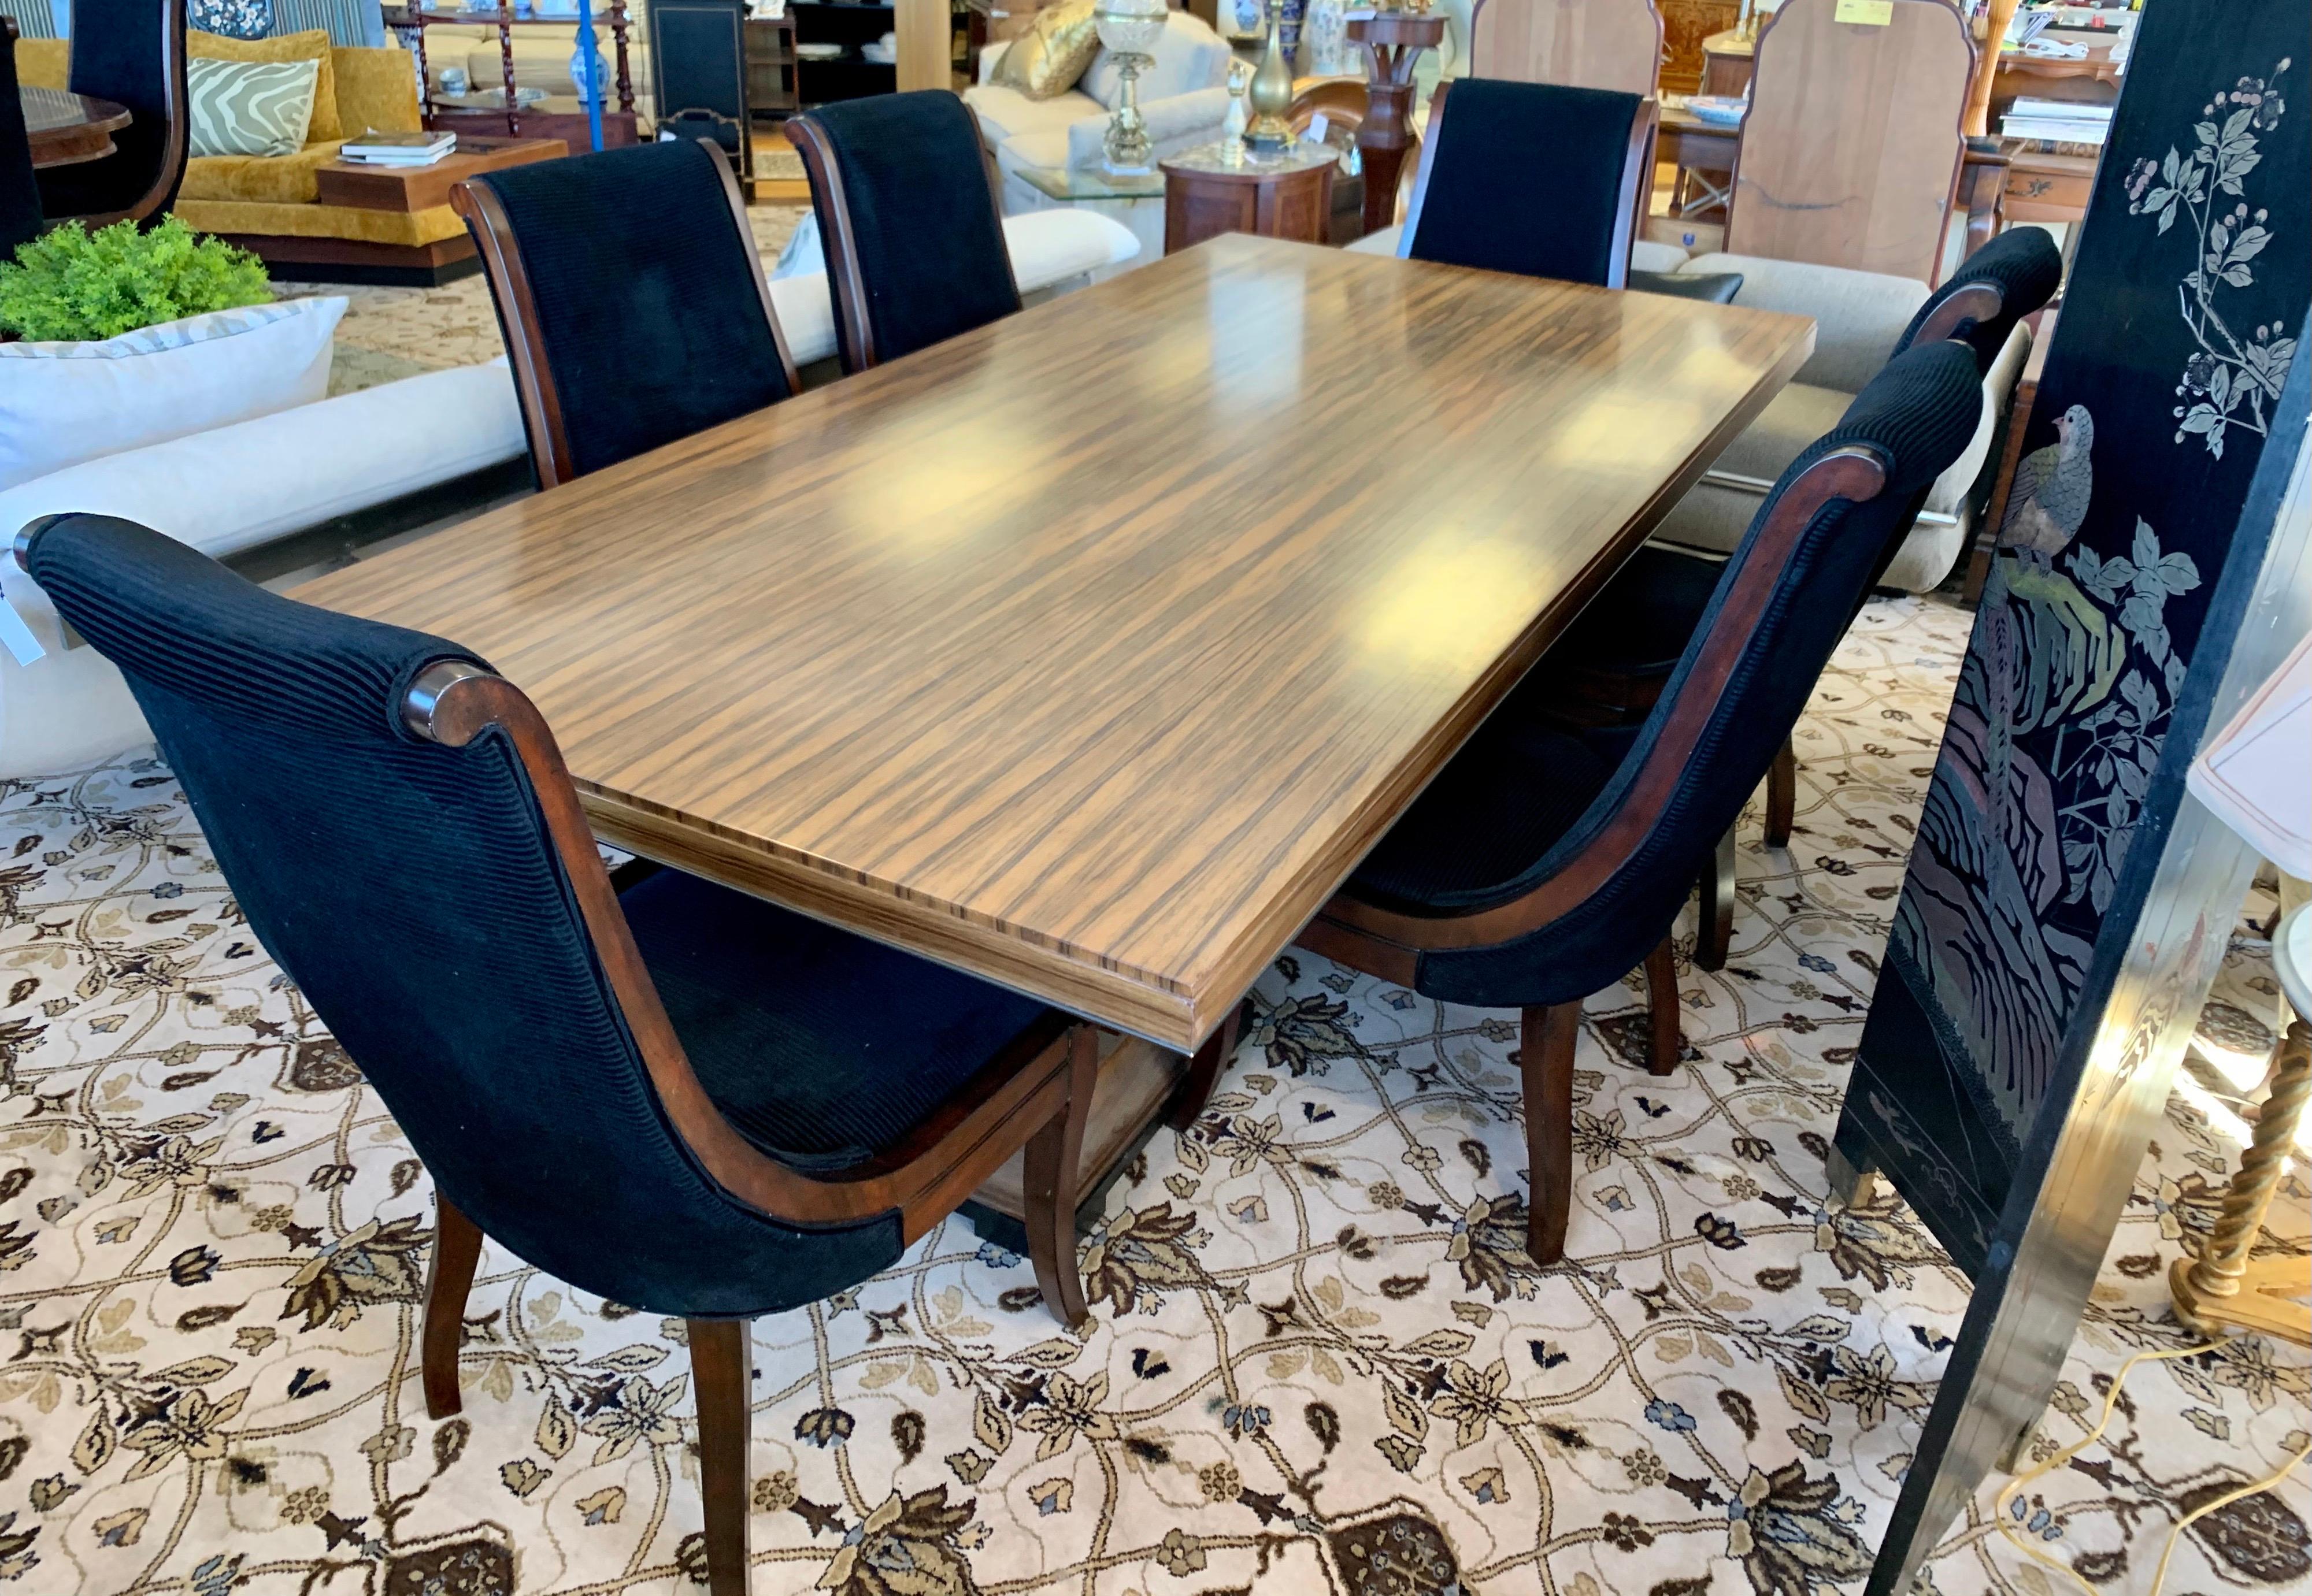 A rare and coveted Donghia London Laurent eight foot dining table which features two pedestals bases,
each consisting of four posts on a flared square base. Each post tapers and curves narrow towards the top, presenting the Lauren tabletop as a